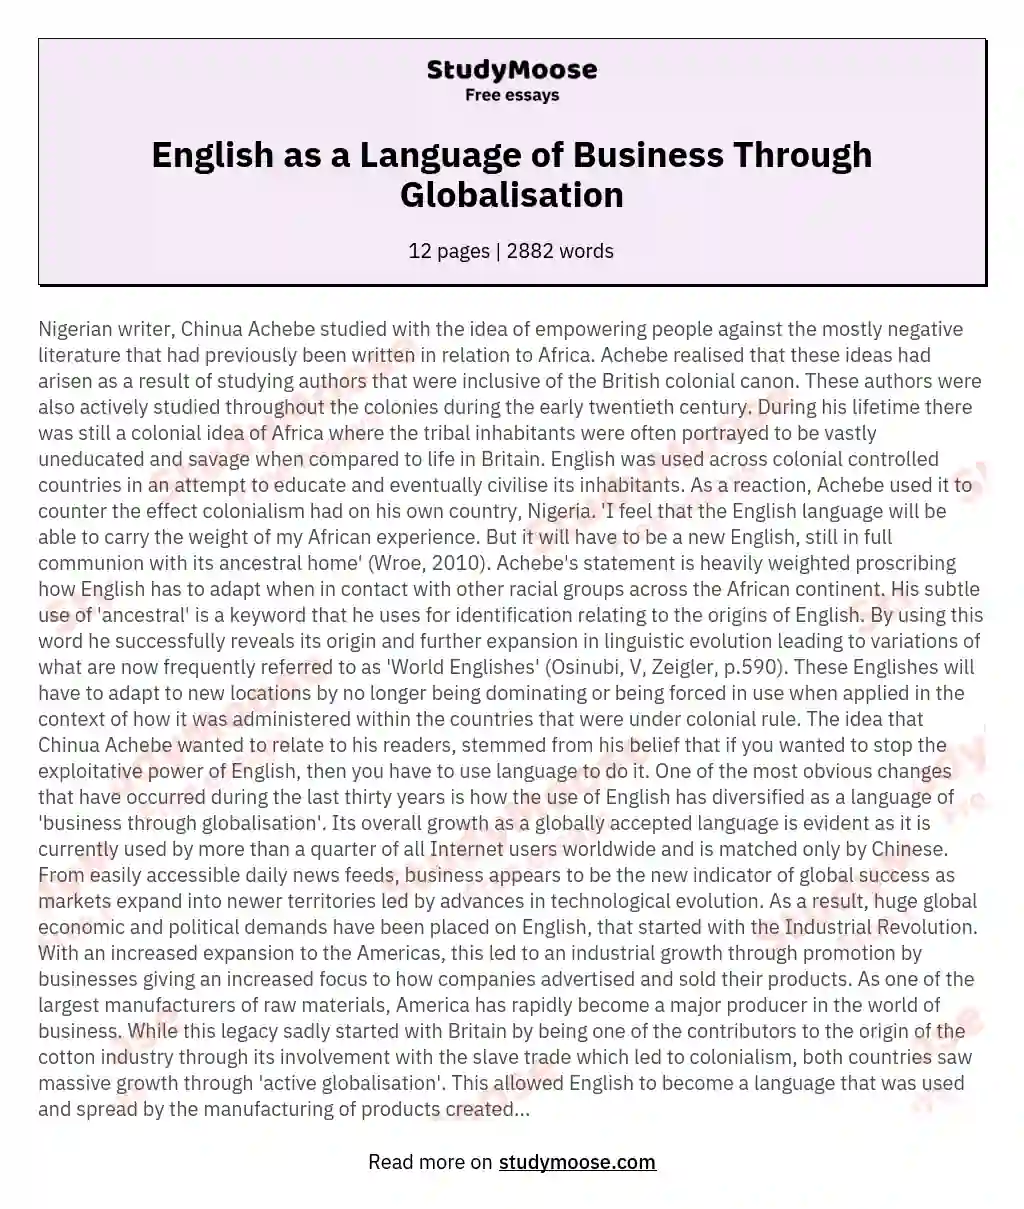 English as a Language of Business Through Globalisation essay